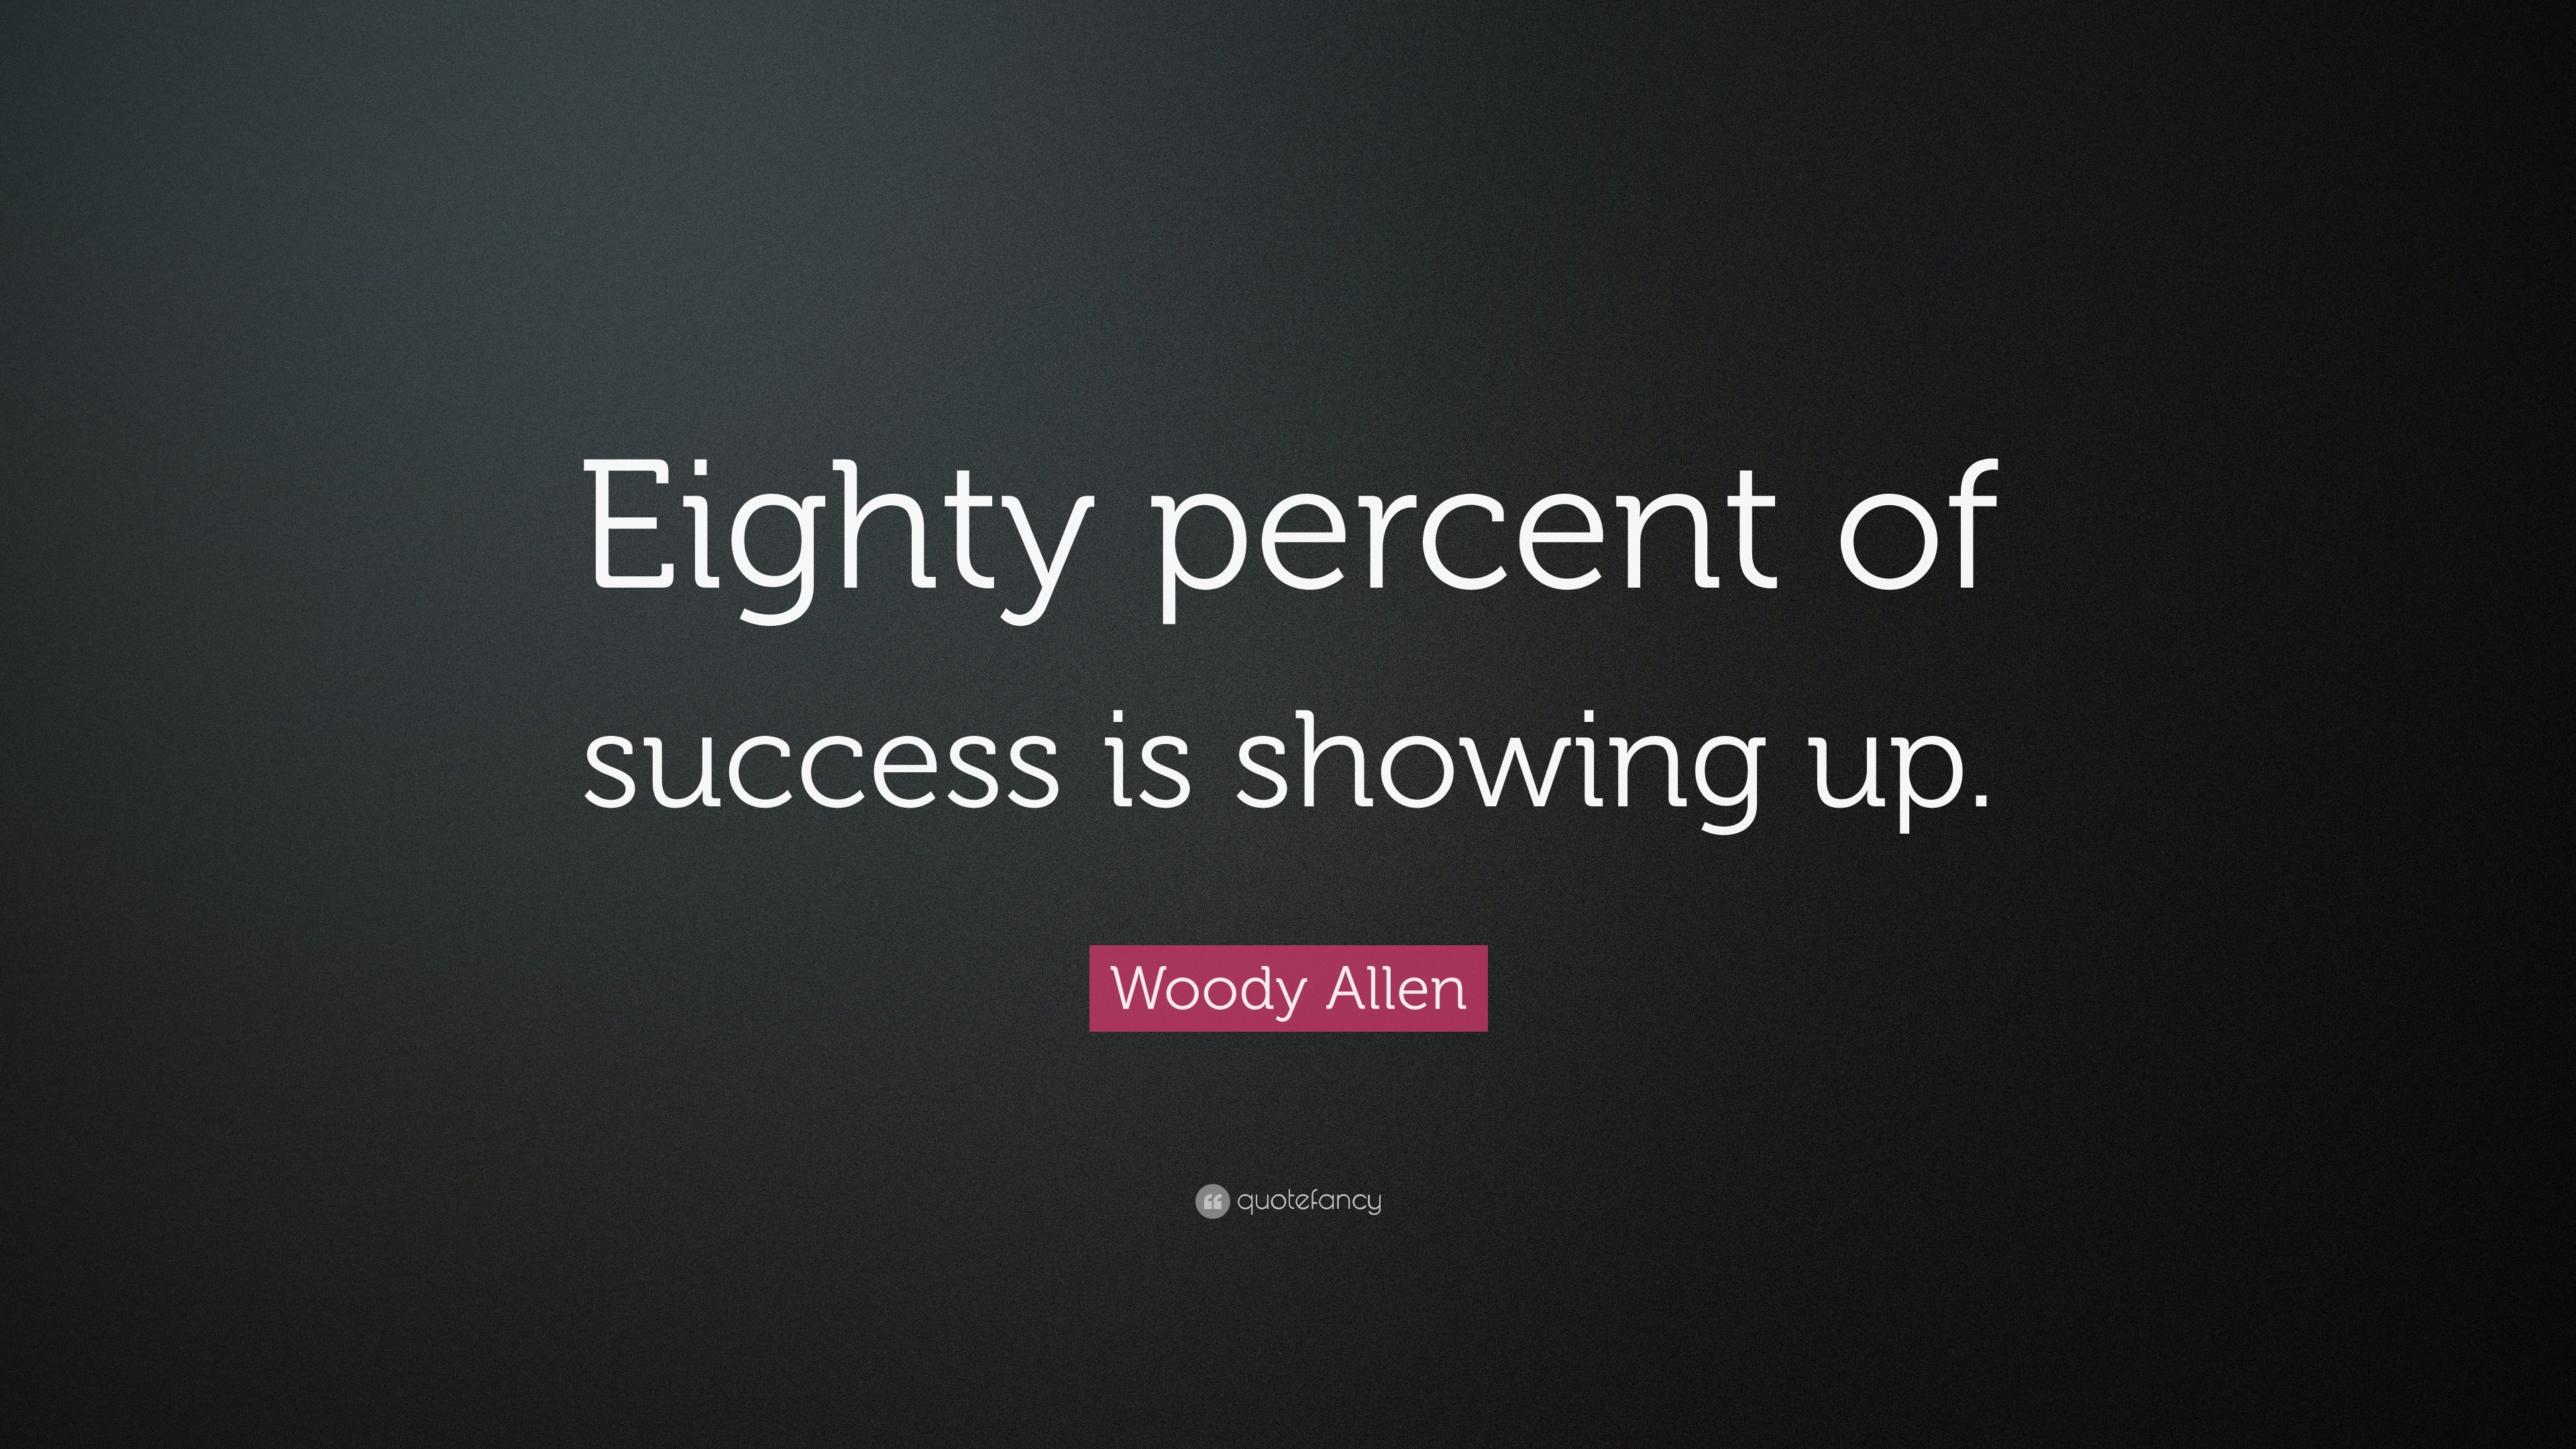 Woody Allen Quote “eighty Percent Of Success Is Showing Up” 0672